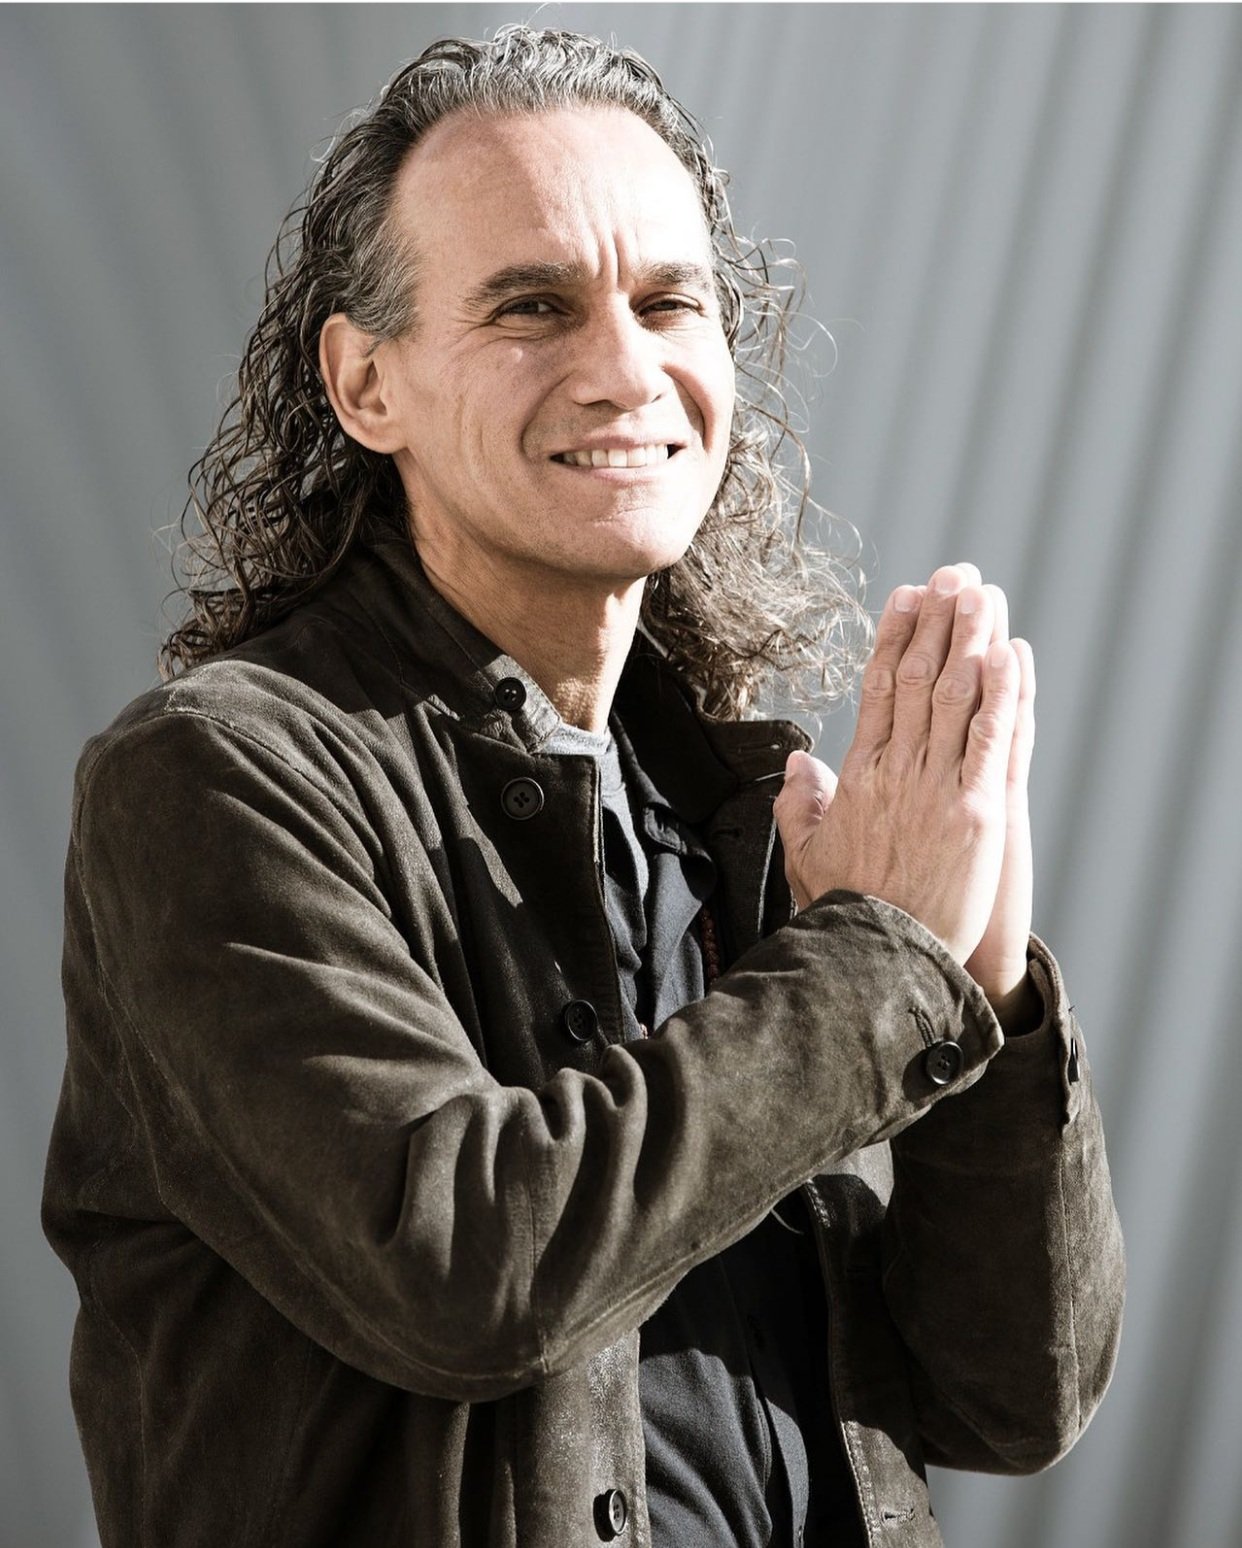 Ulises Calatayud holding his hands in a prayer position against a grey backdrop